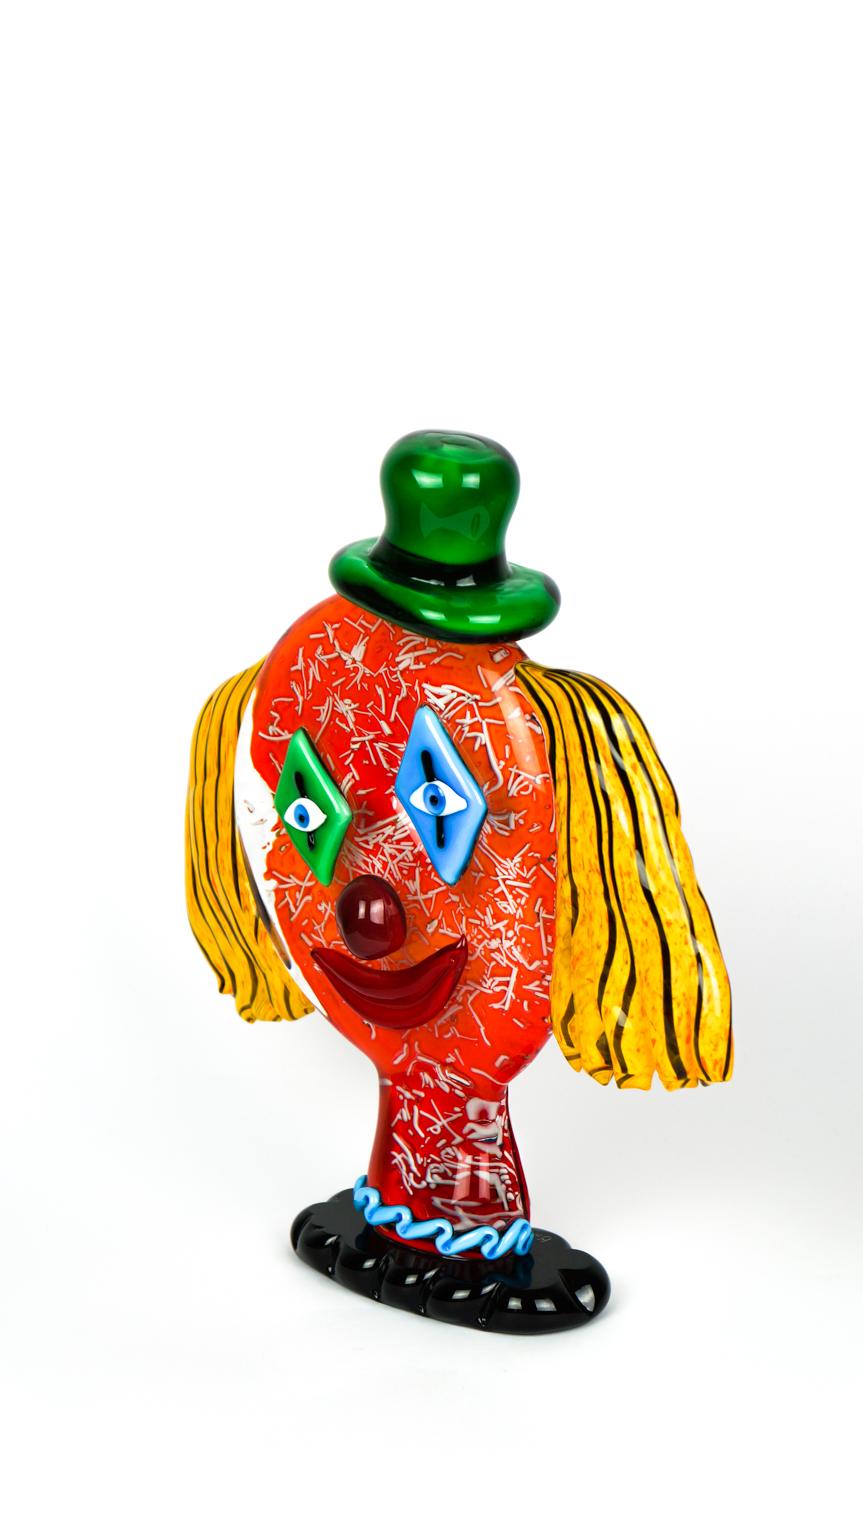 Abstract Sculpture Head Clown Murano Glass Pop Art by Badioli For Sale 9